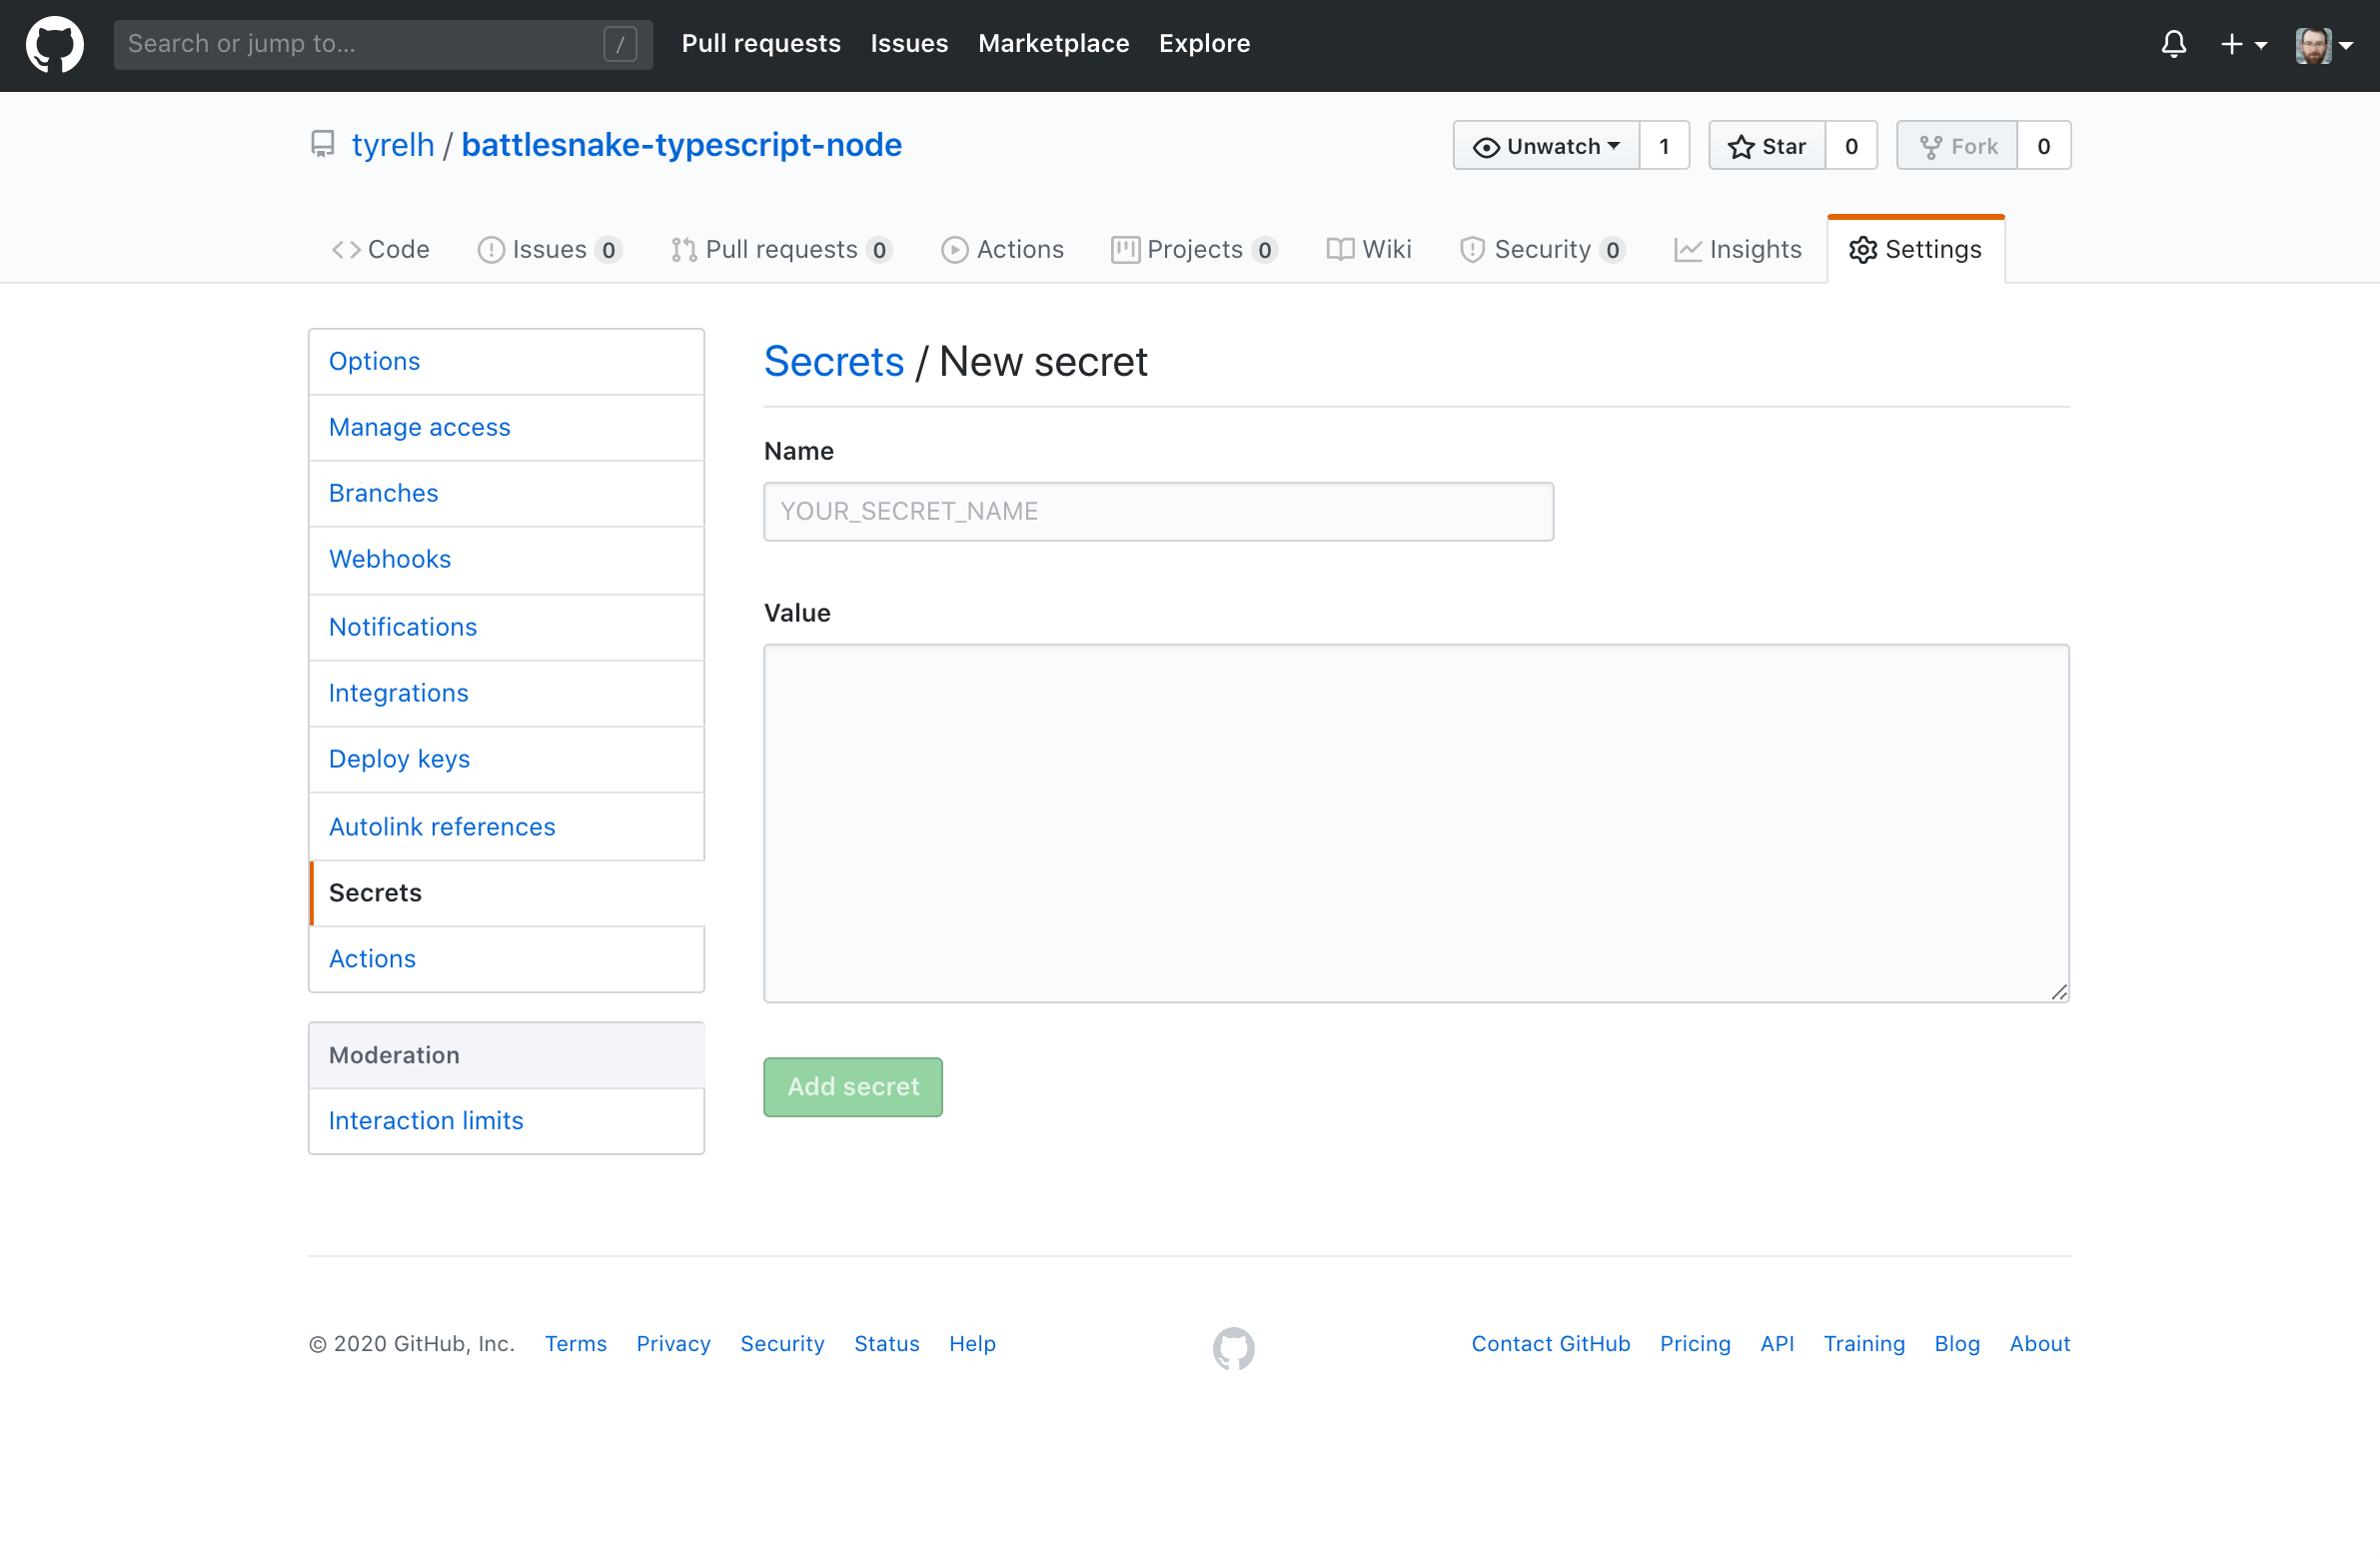 Screenshot of Github showing the secret creation screen with text fields for the secret and the name of the secret